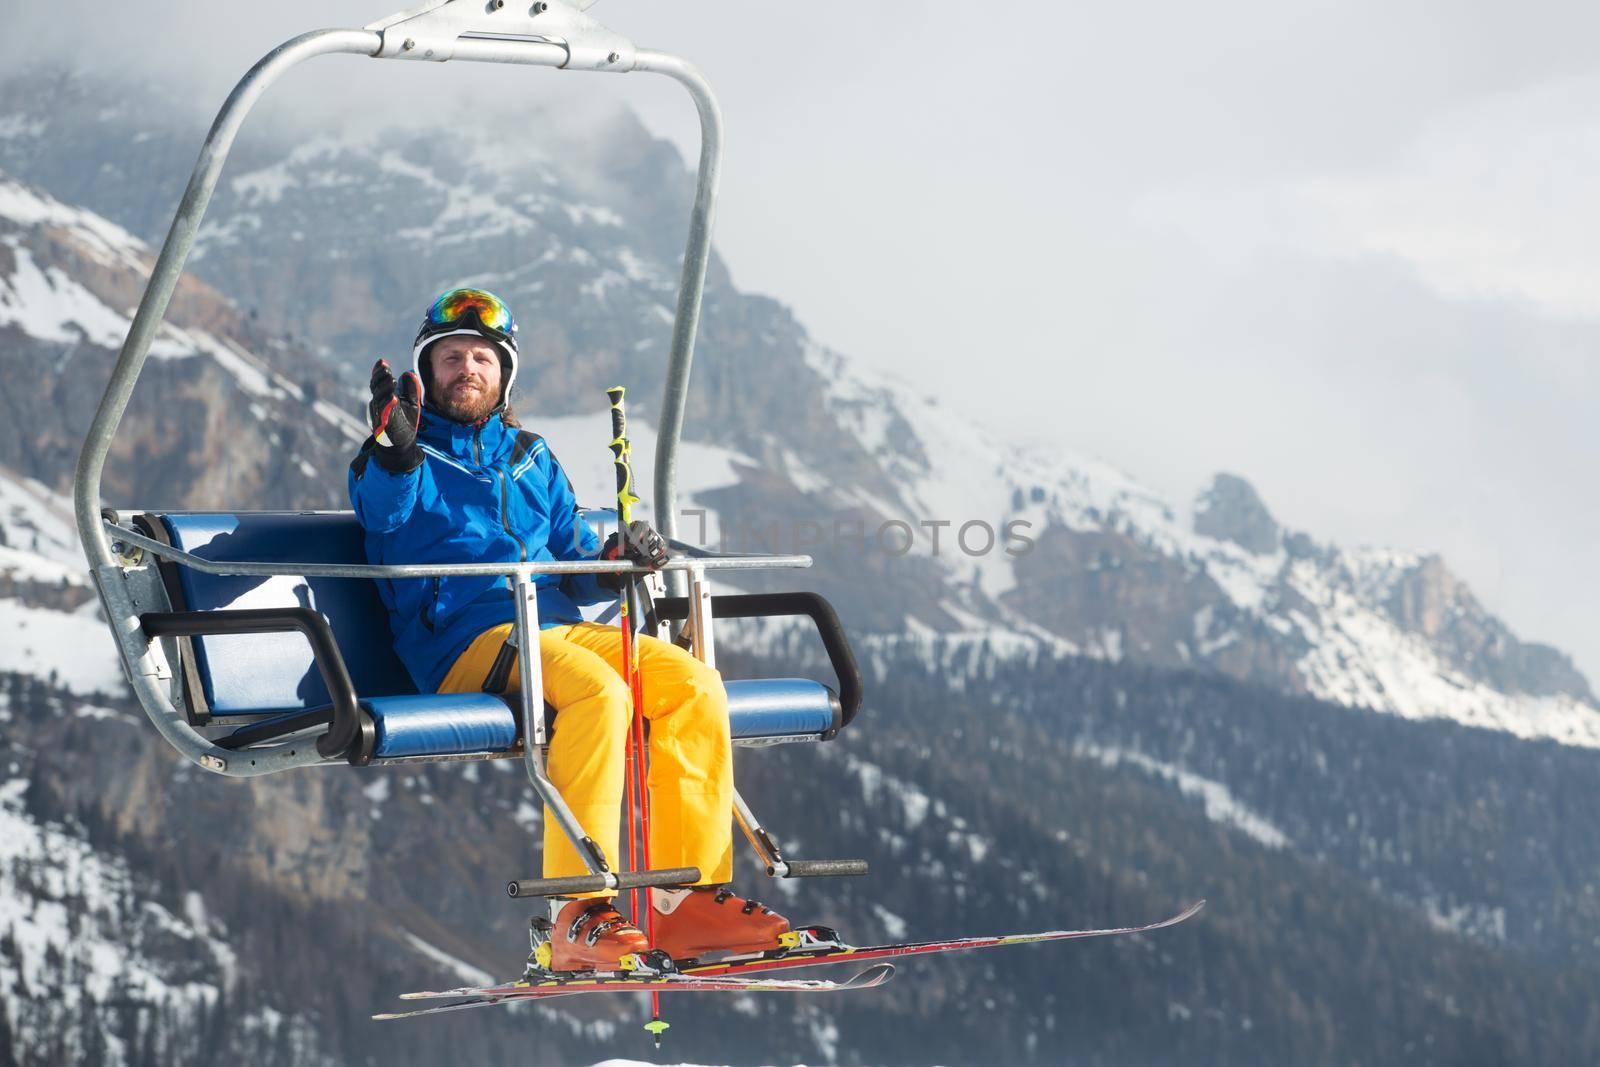 Skier man on ski chair lift Dolomites Italy in wintertime beautiful alps winter mountains and ski slope Cortina d'Ampezzo Col Gallina